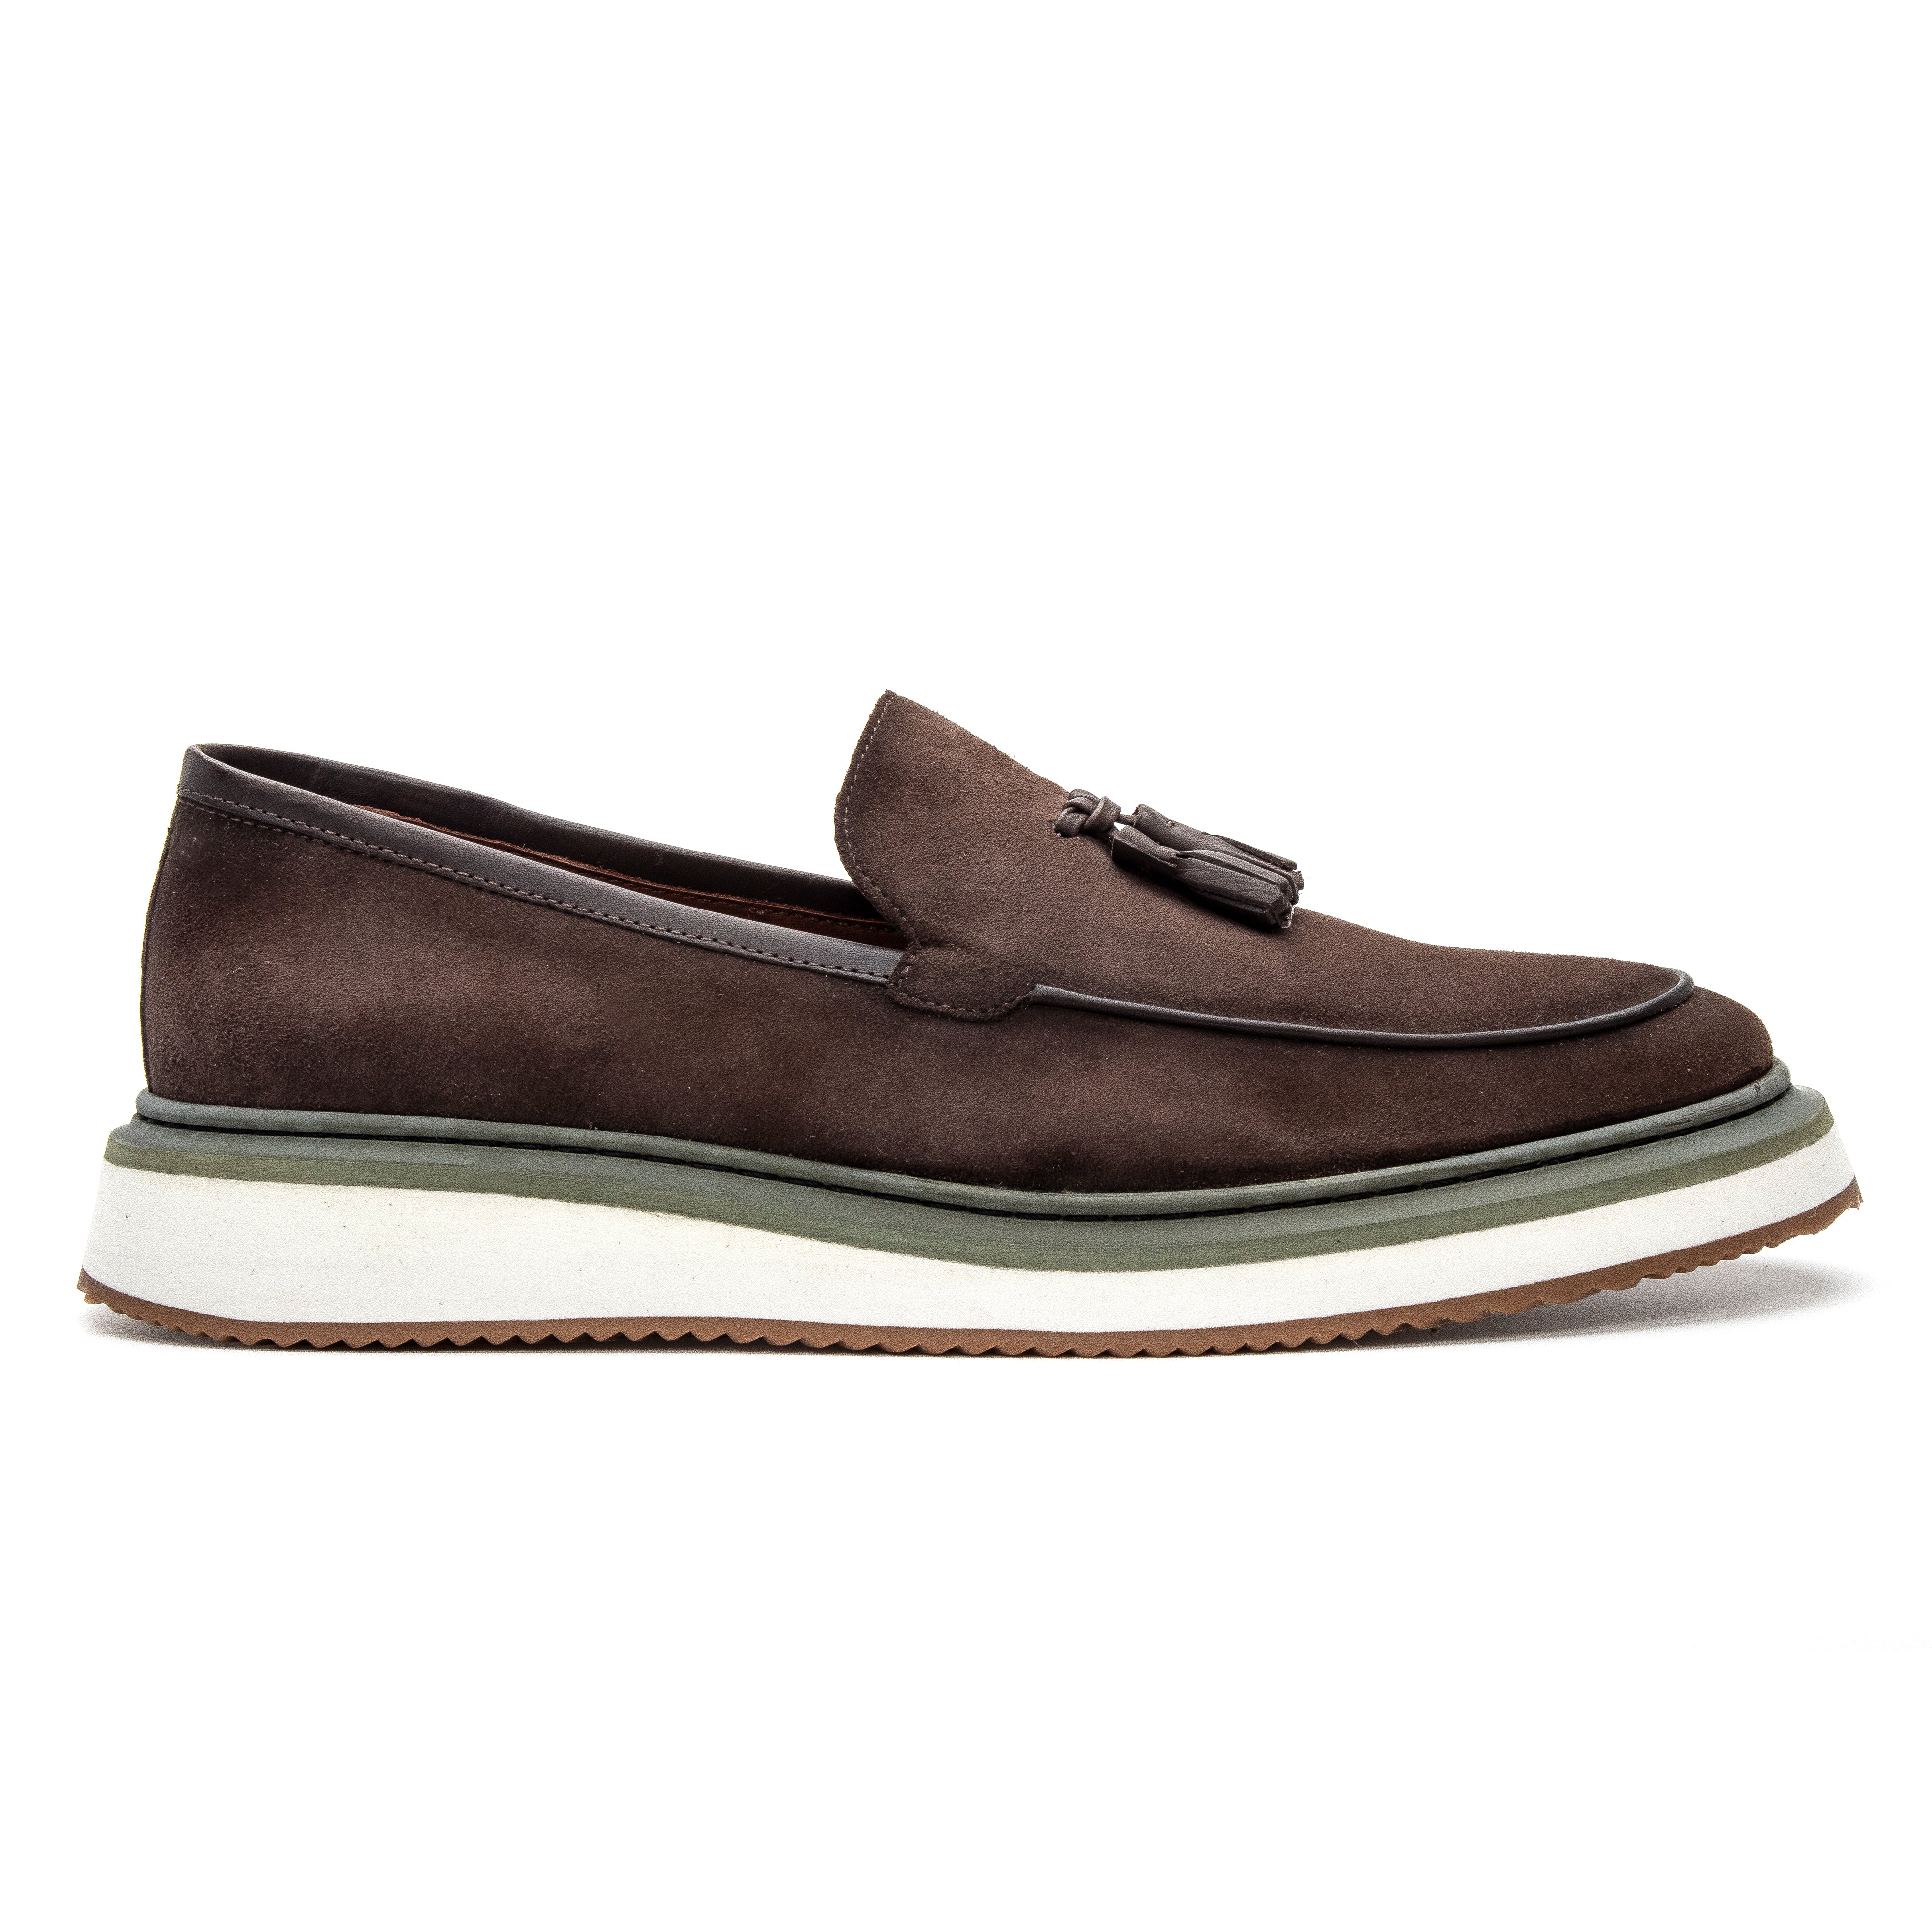 Marcus Raised Loafer - Brown